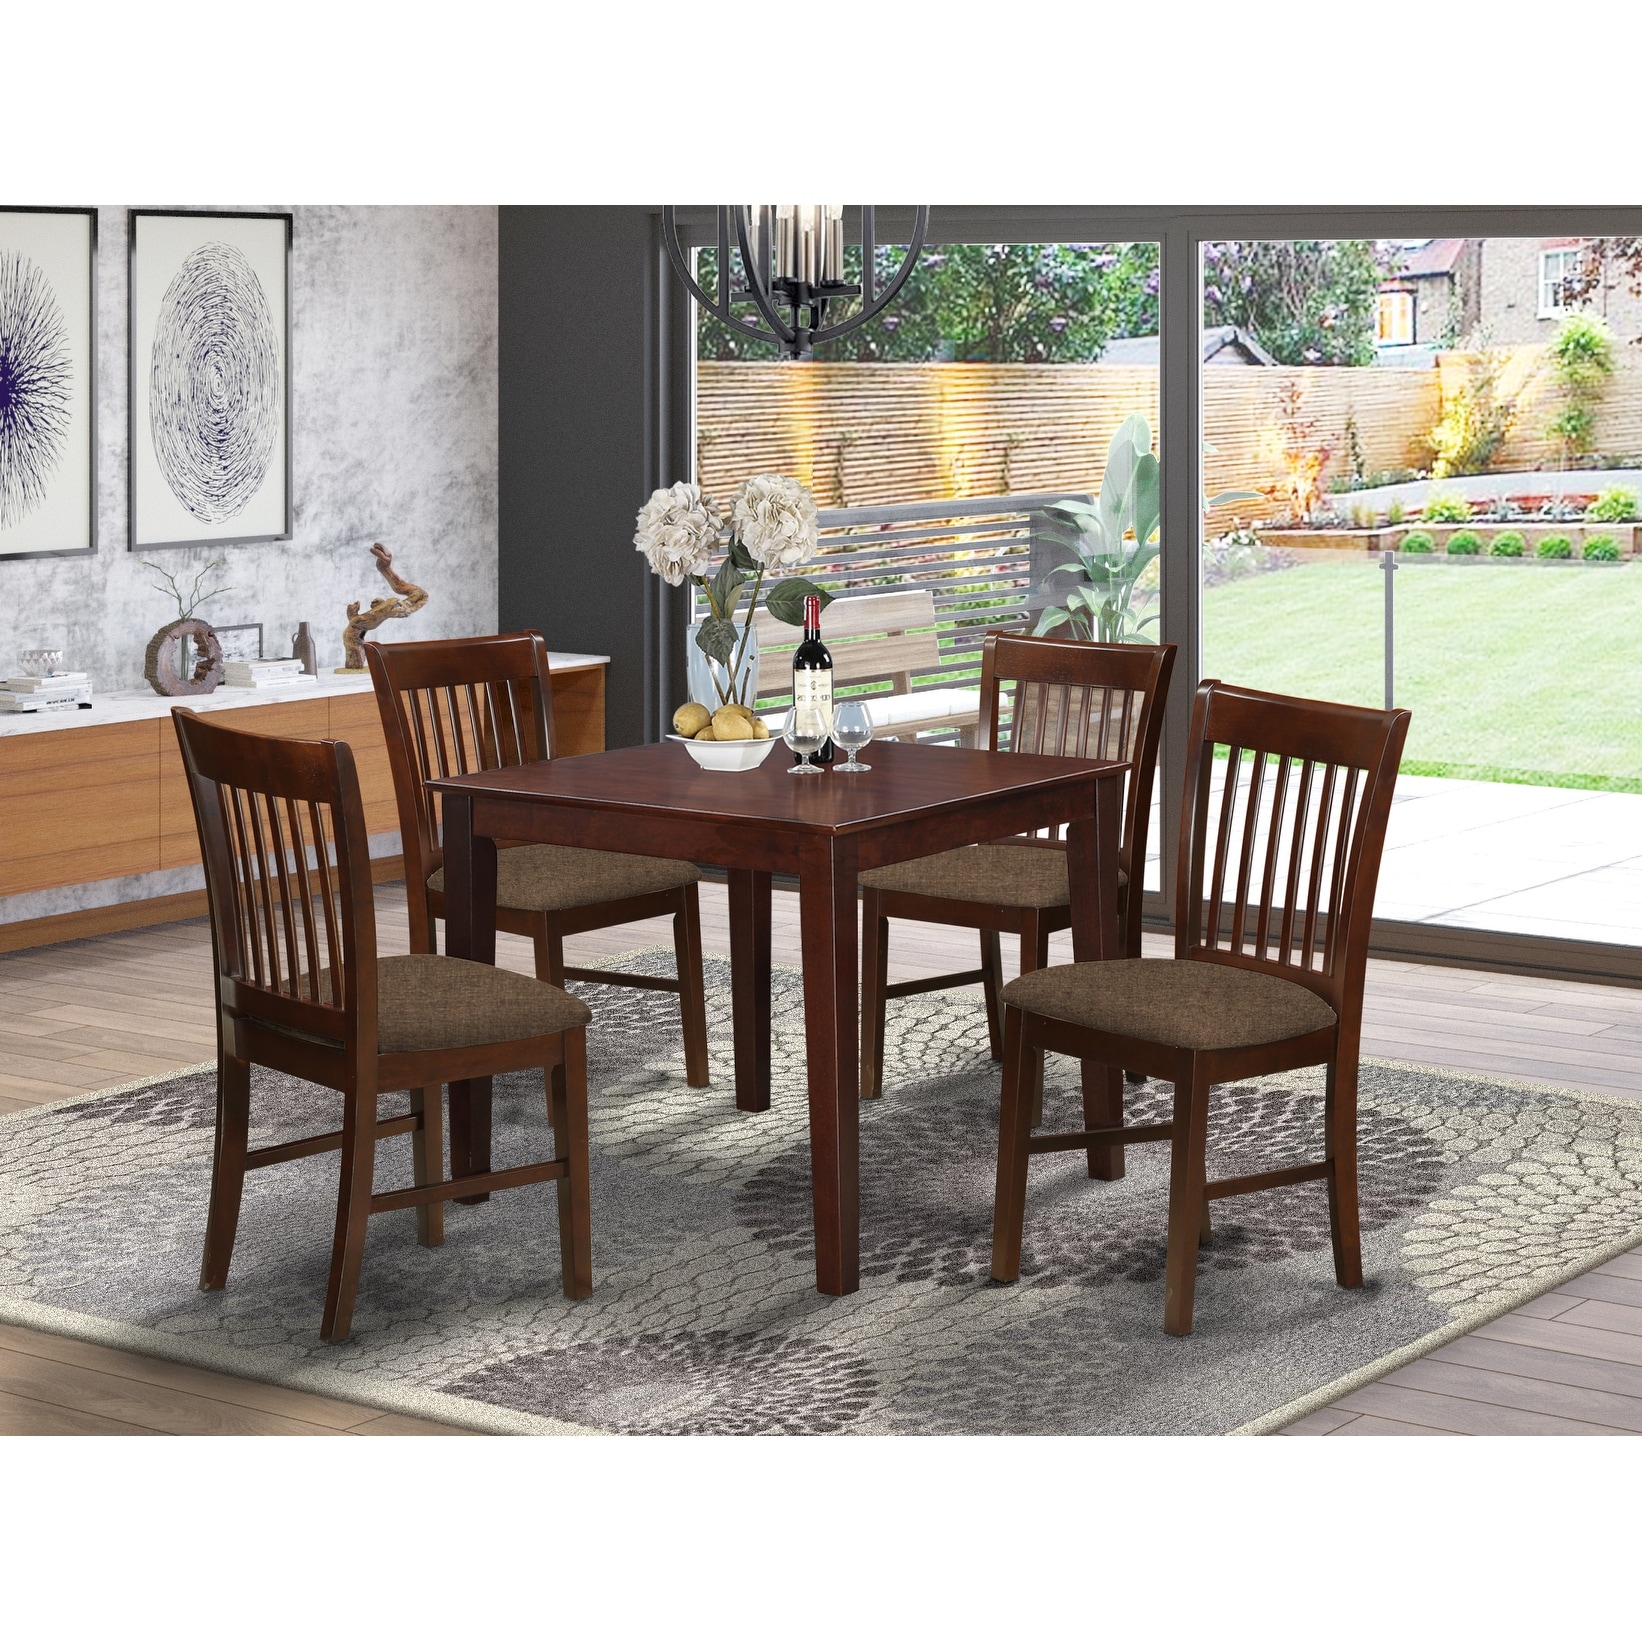 Mahogany Square Table And 4 Chairs 5 Piece Dining Set Overstock 10201135